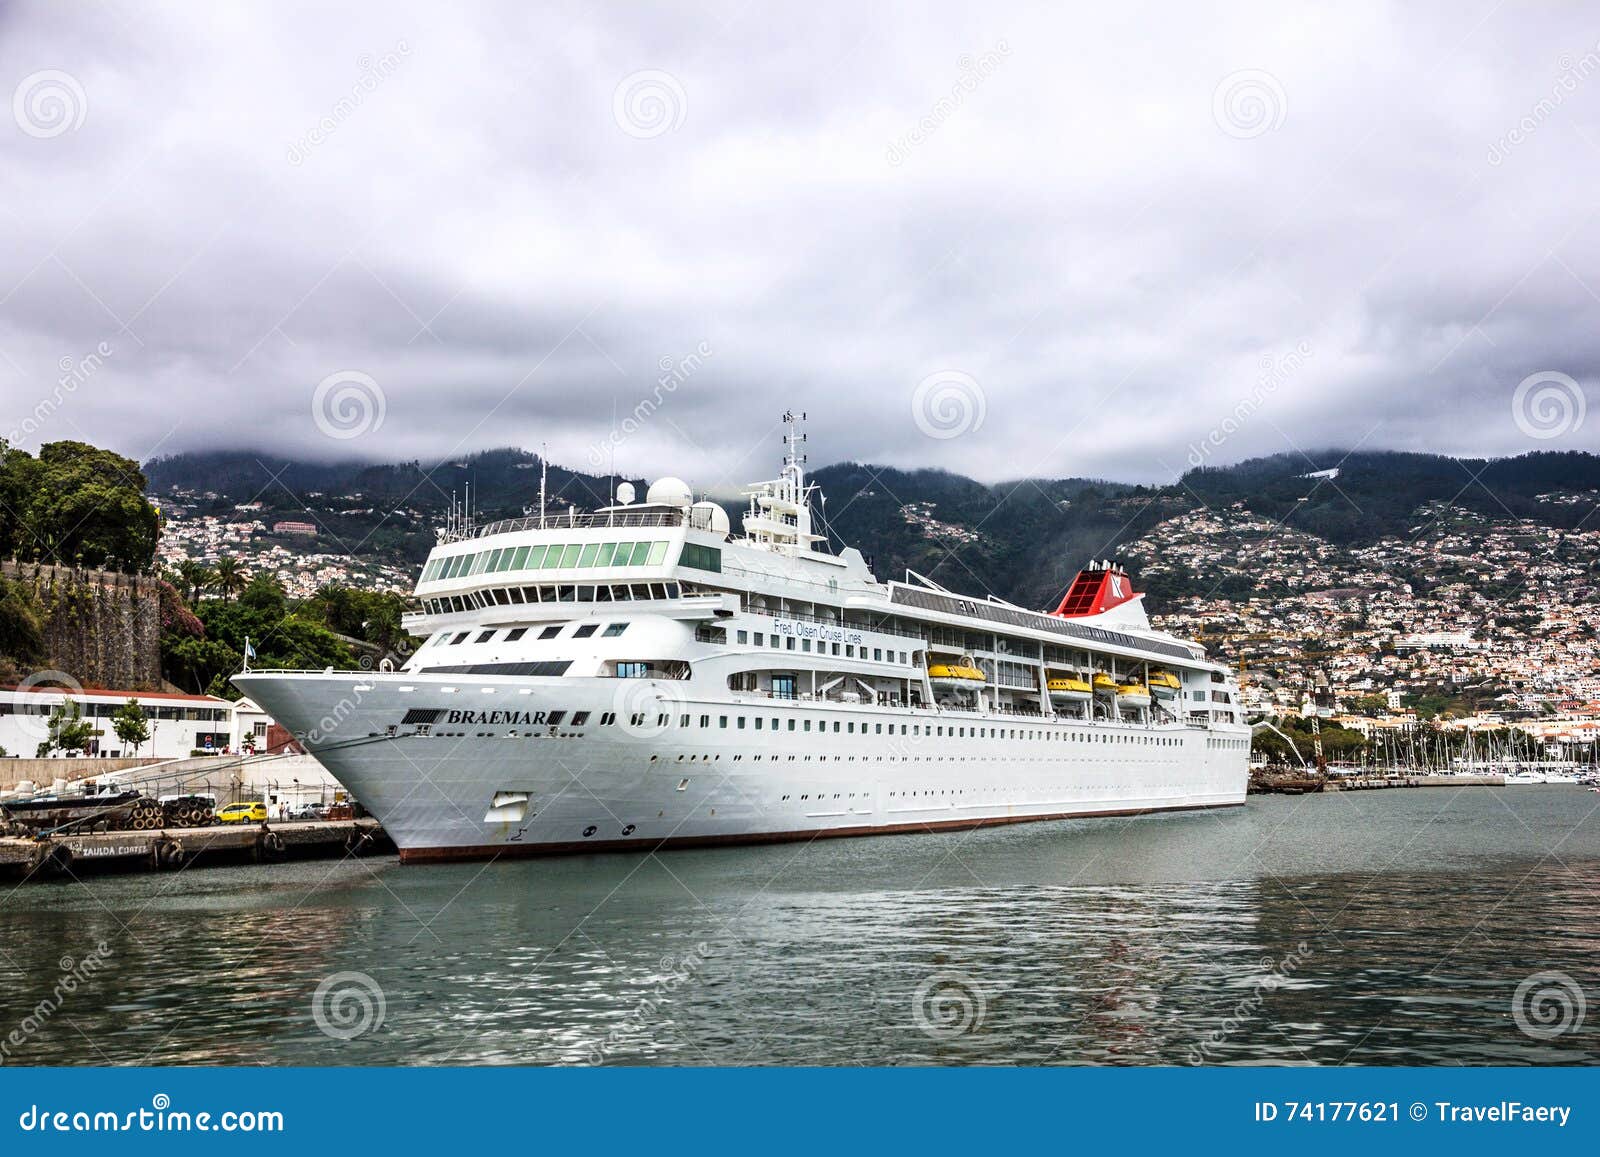 funchal harbour cruise ship arrivals